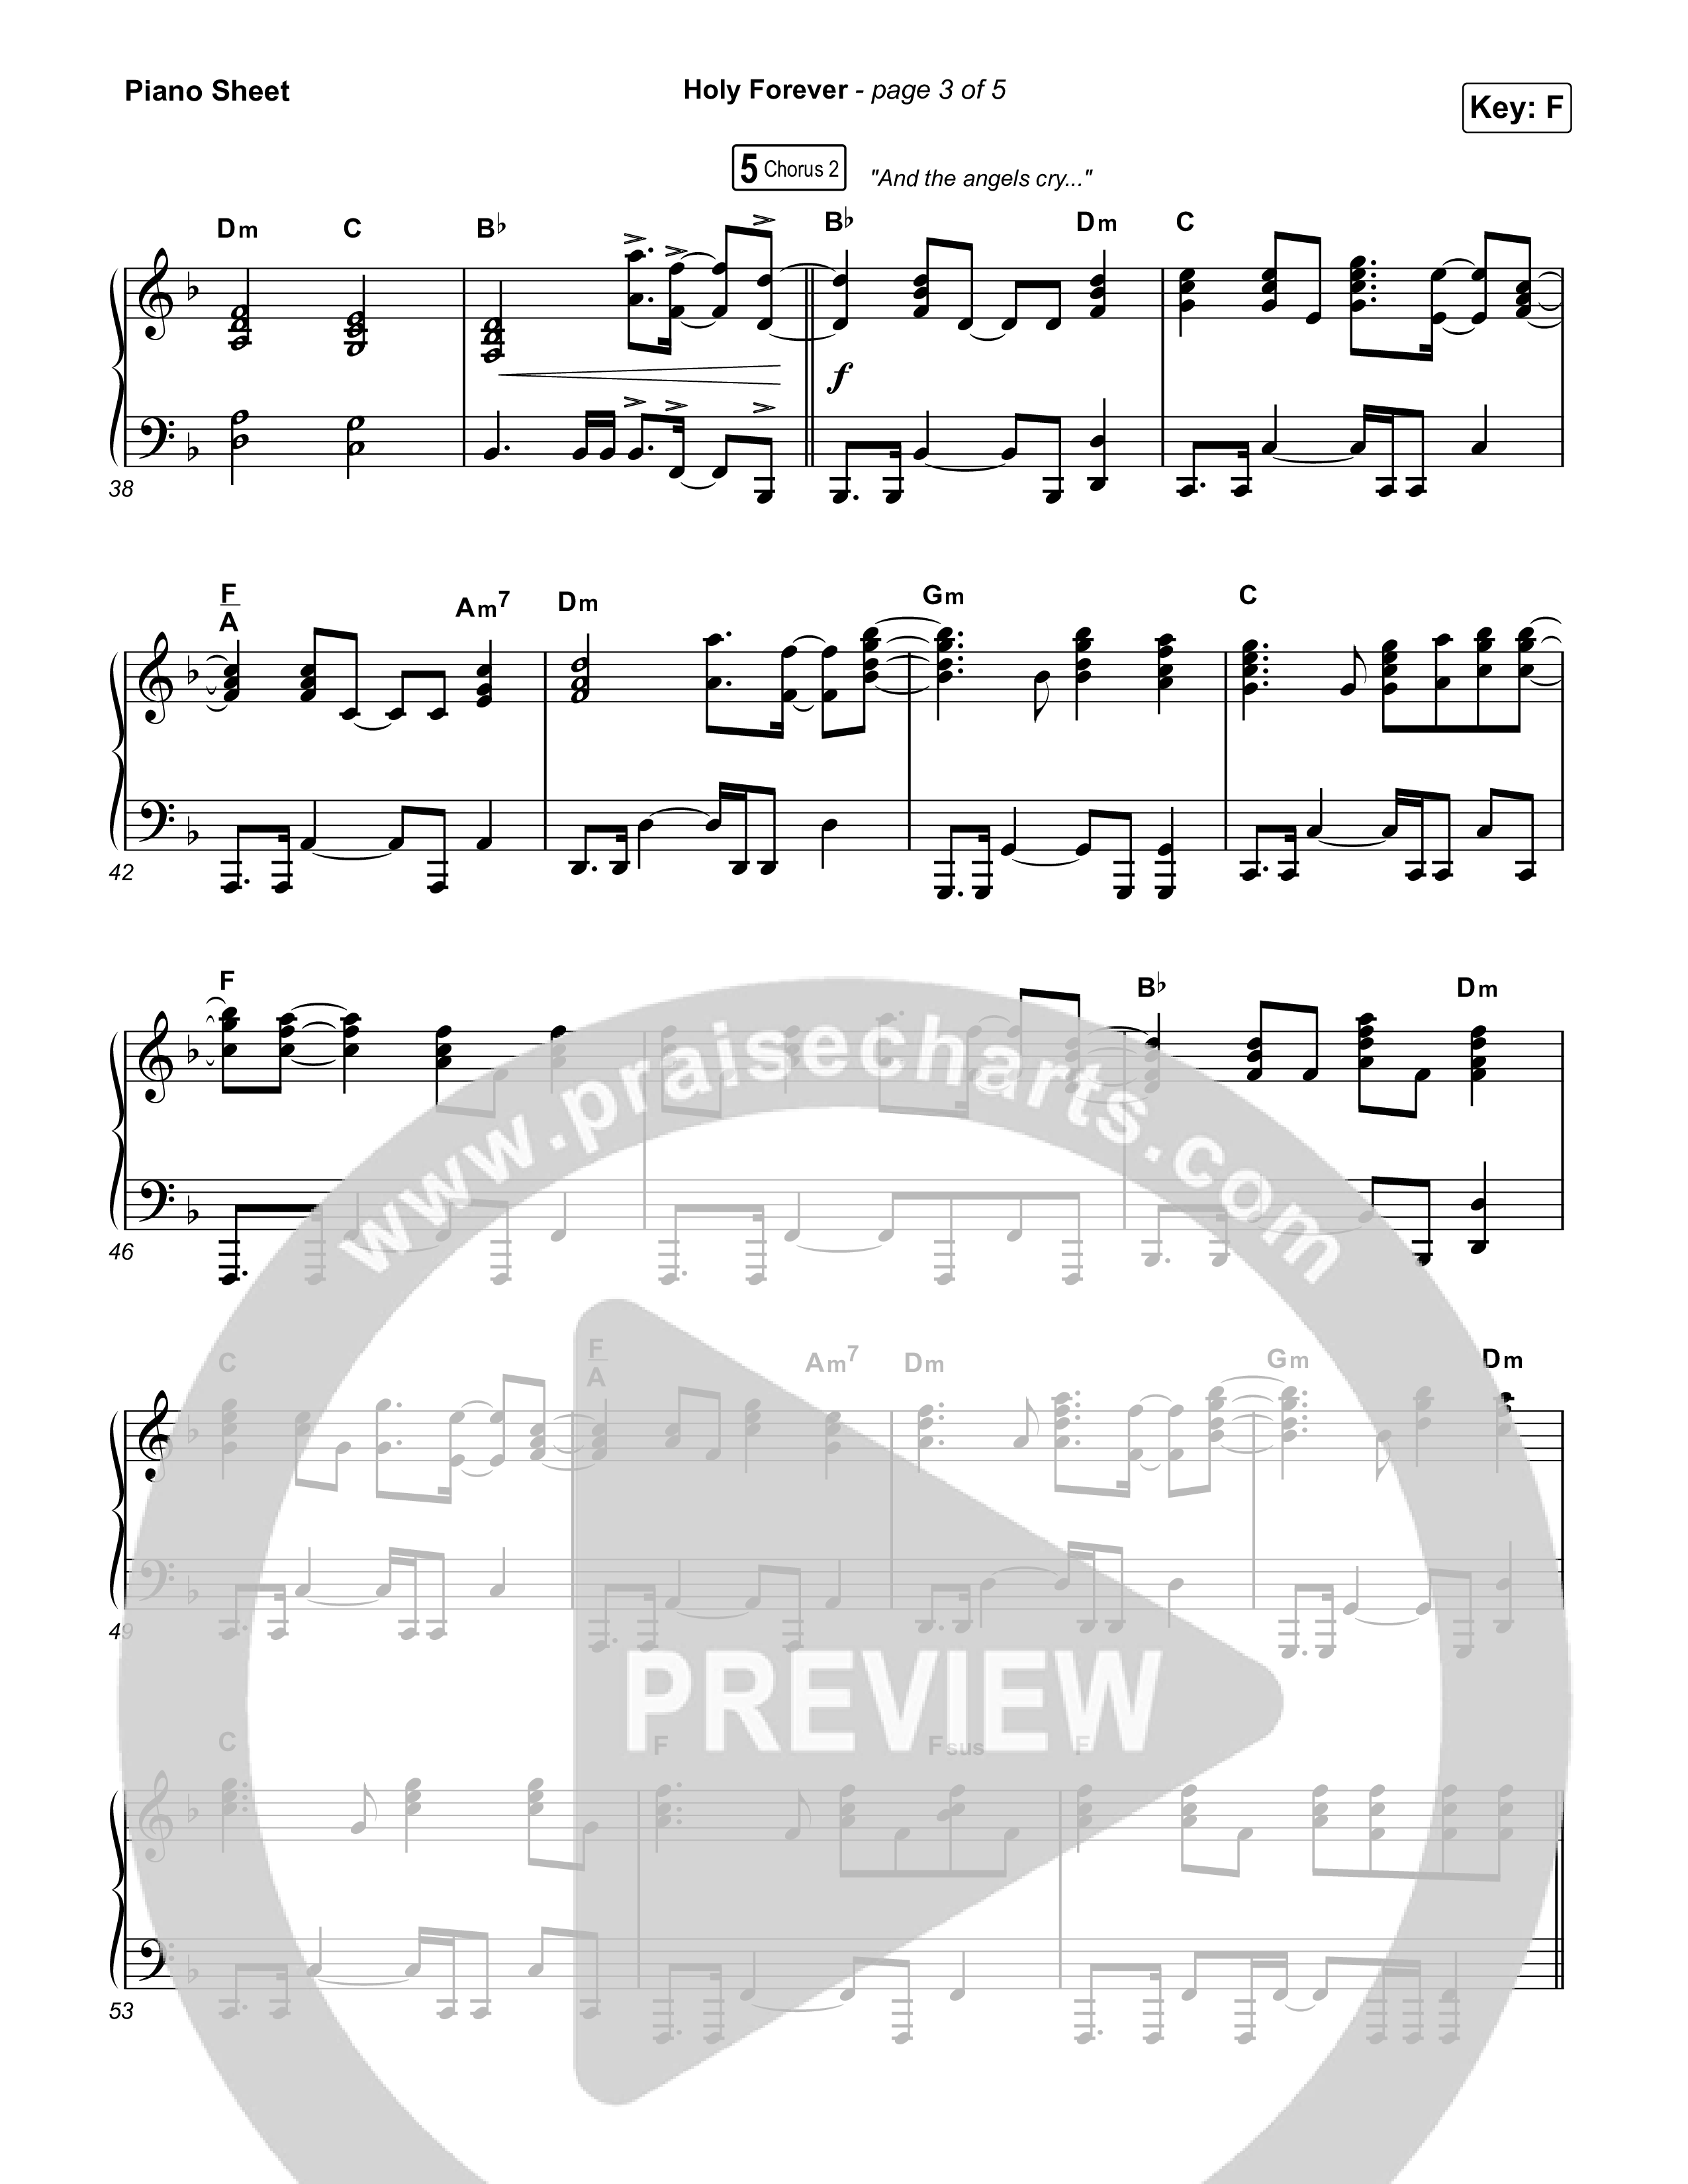 Holy Forever (Single Version) Piano Sheet (CeCe Winans)